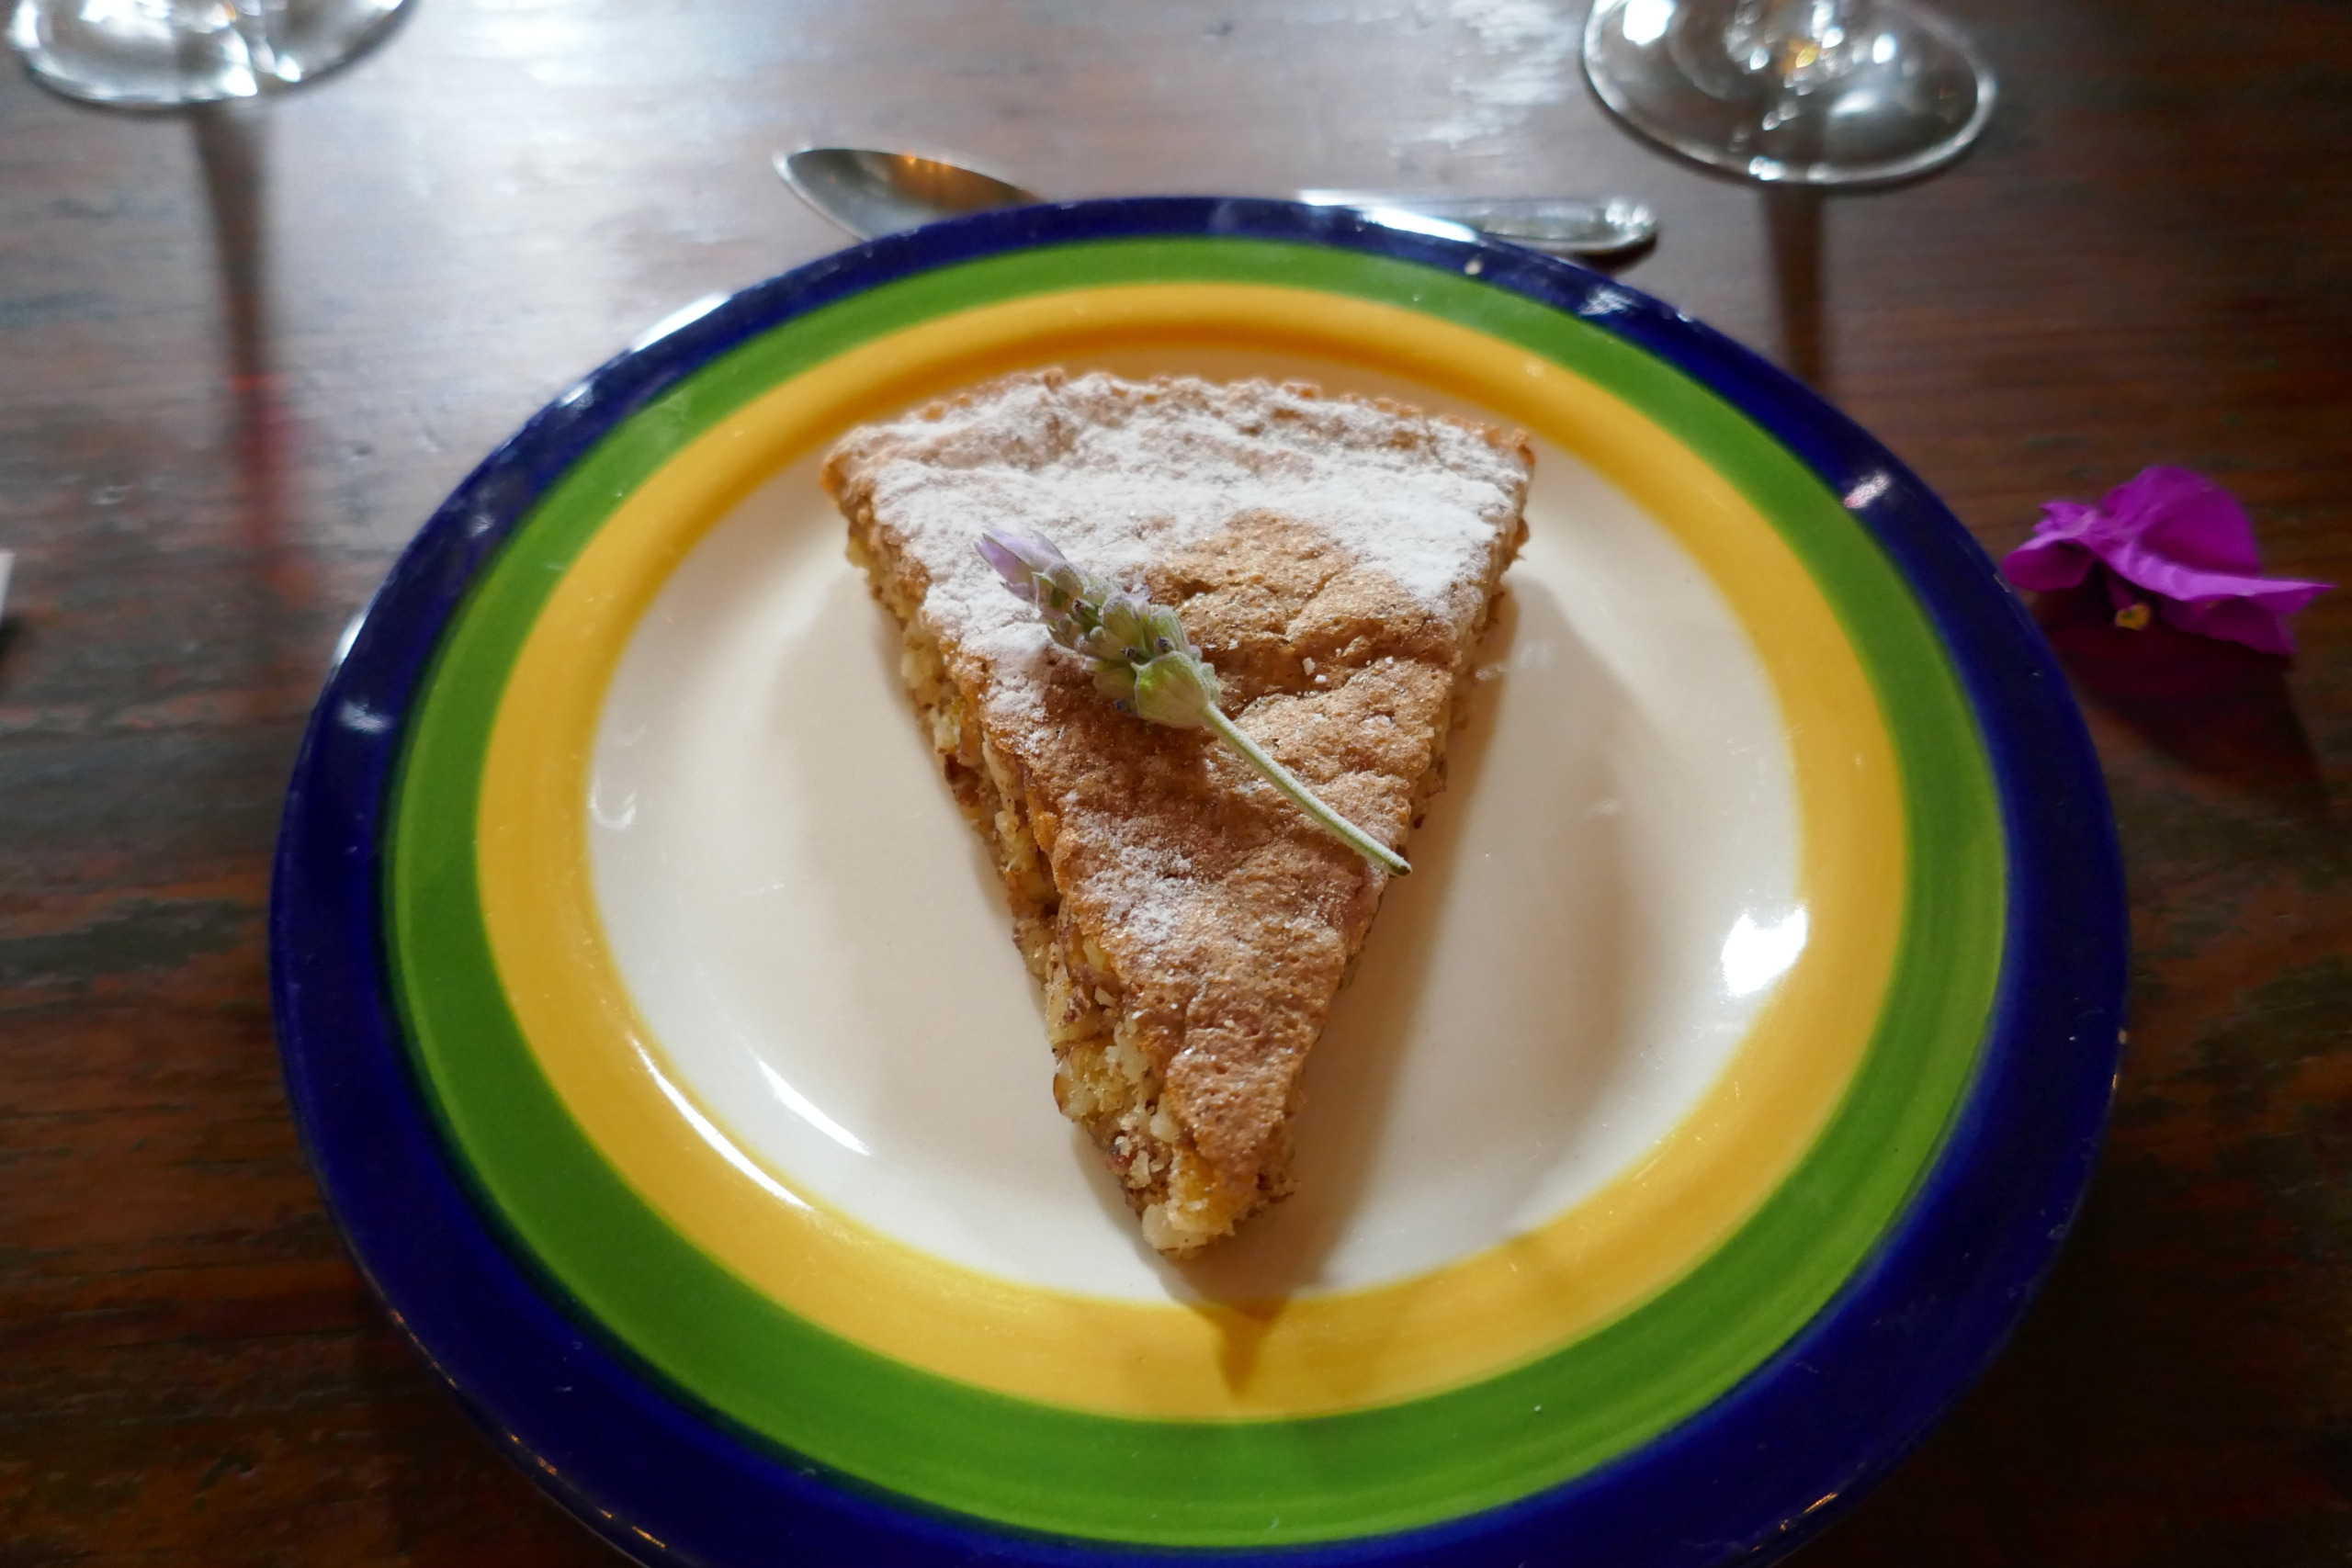 A slice of apple pie on a white saucer rimmed in yellow, green , and blue